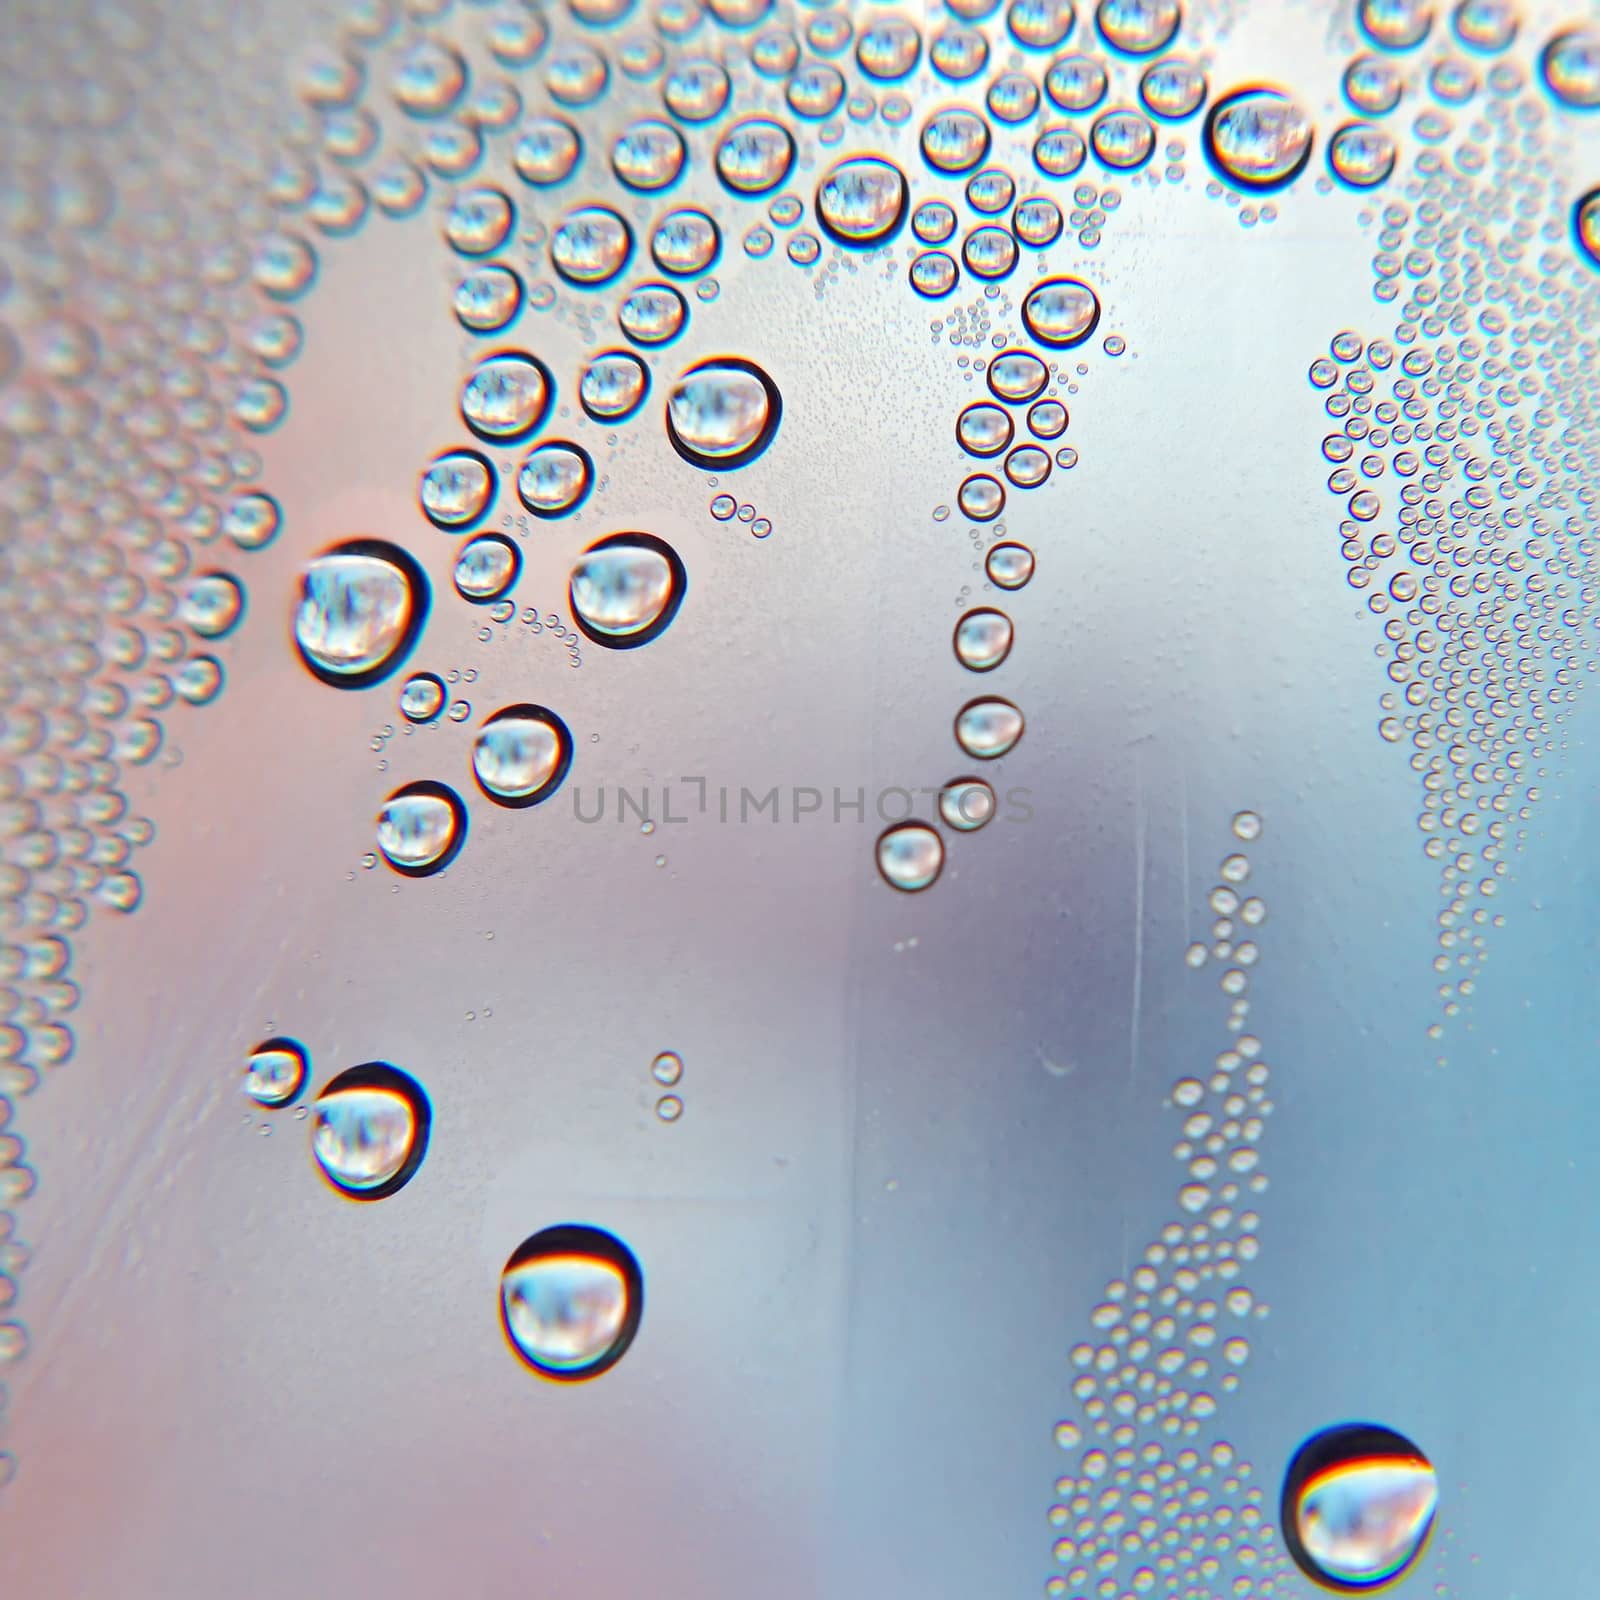 Drops of water on the crooked glass, shallow dof